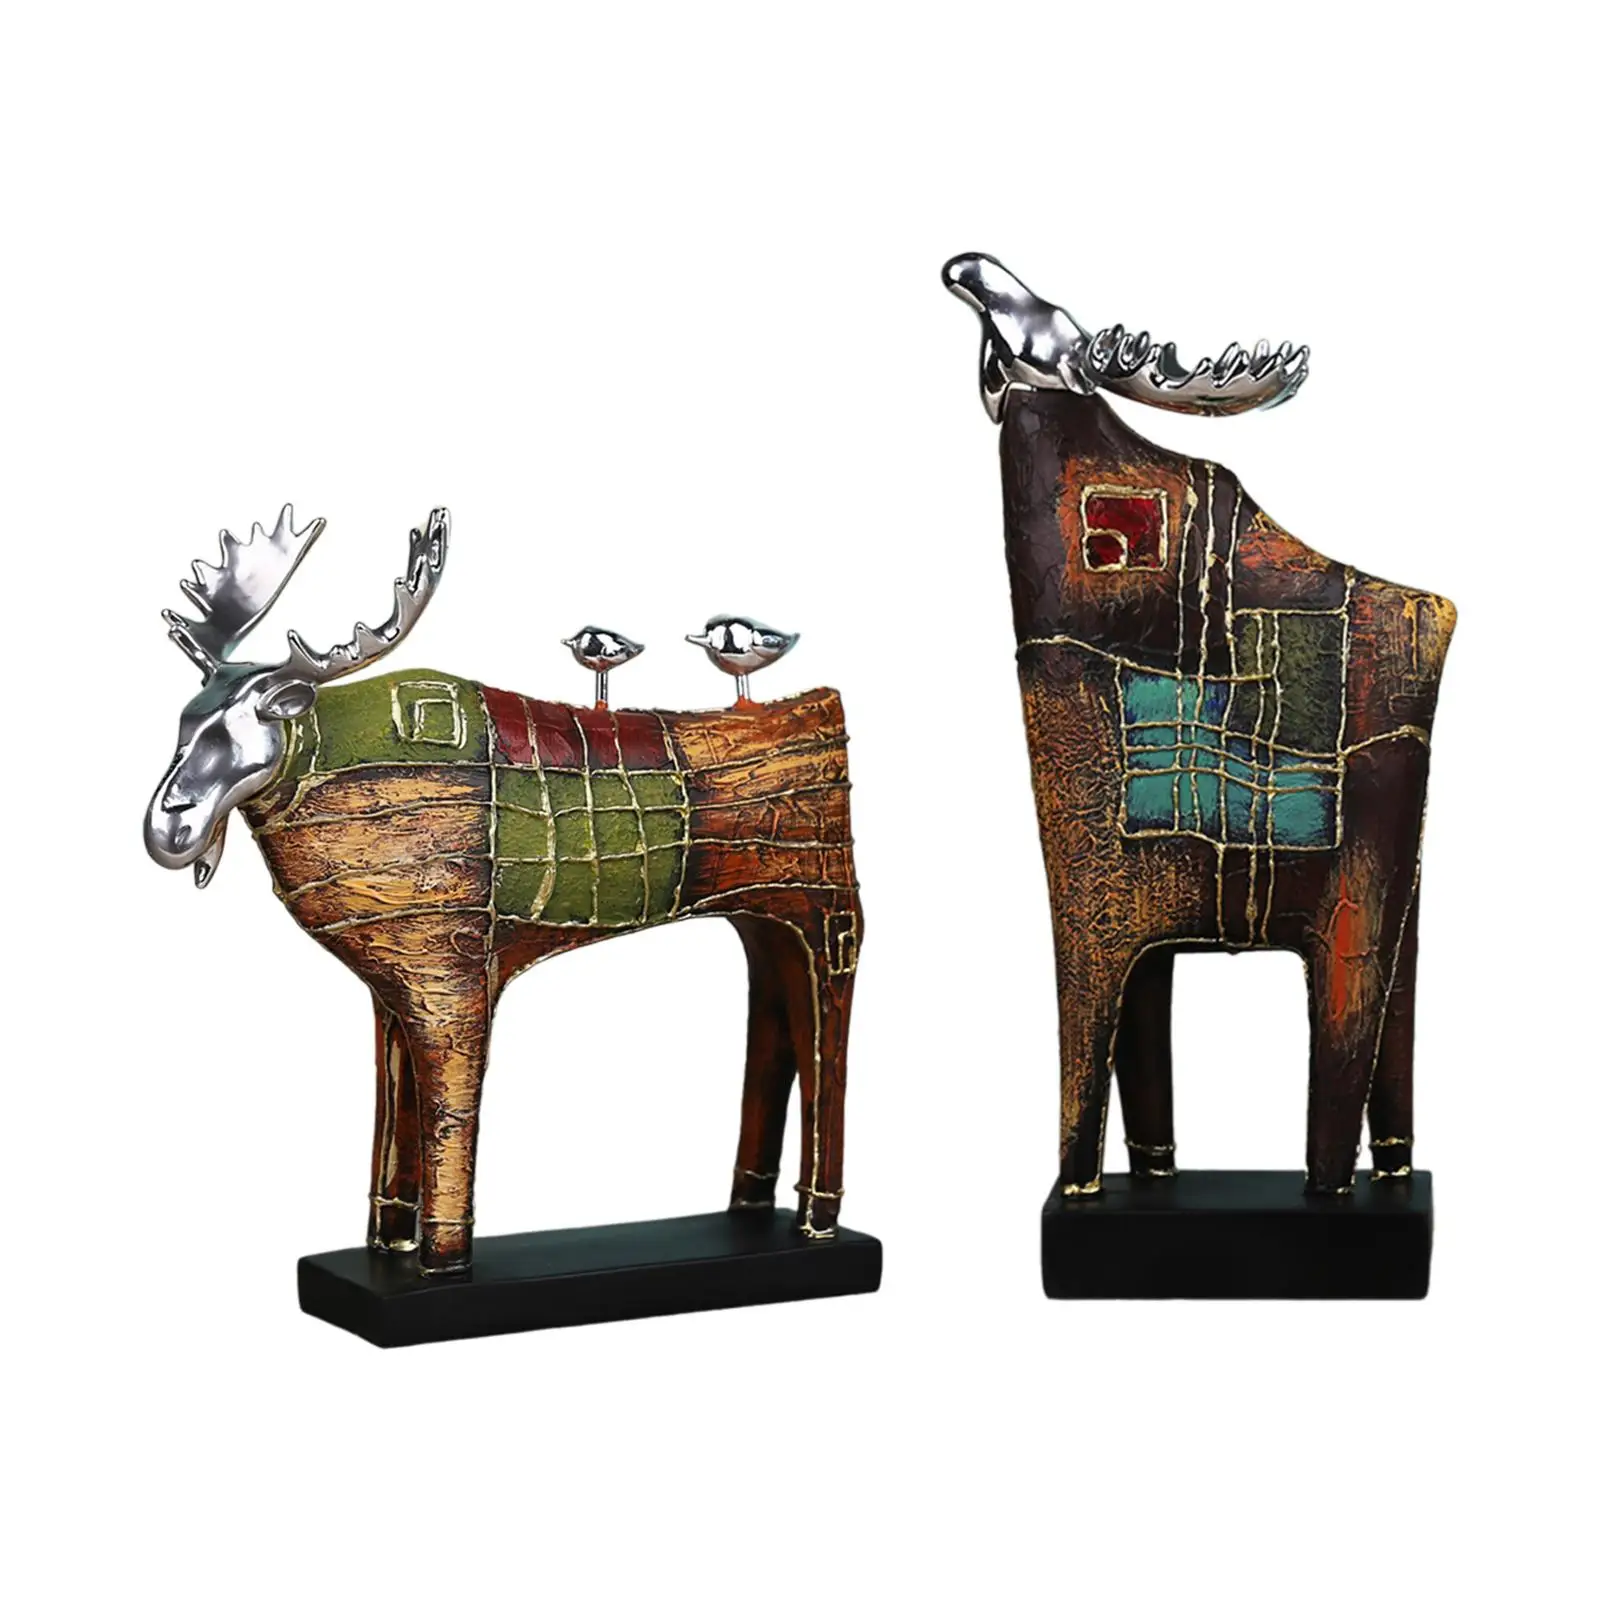 

Deer Figurine Birthday Gift Abstract Sculpture for Living Room Office Hotel